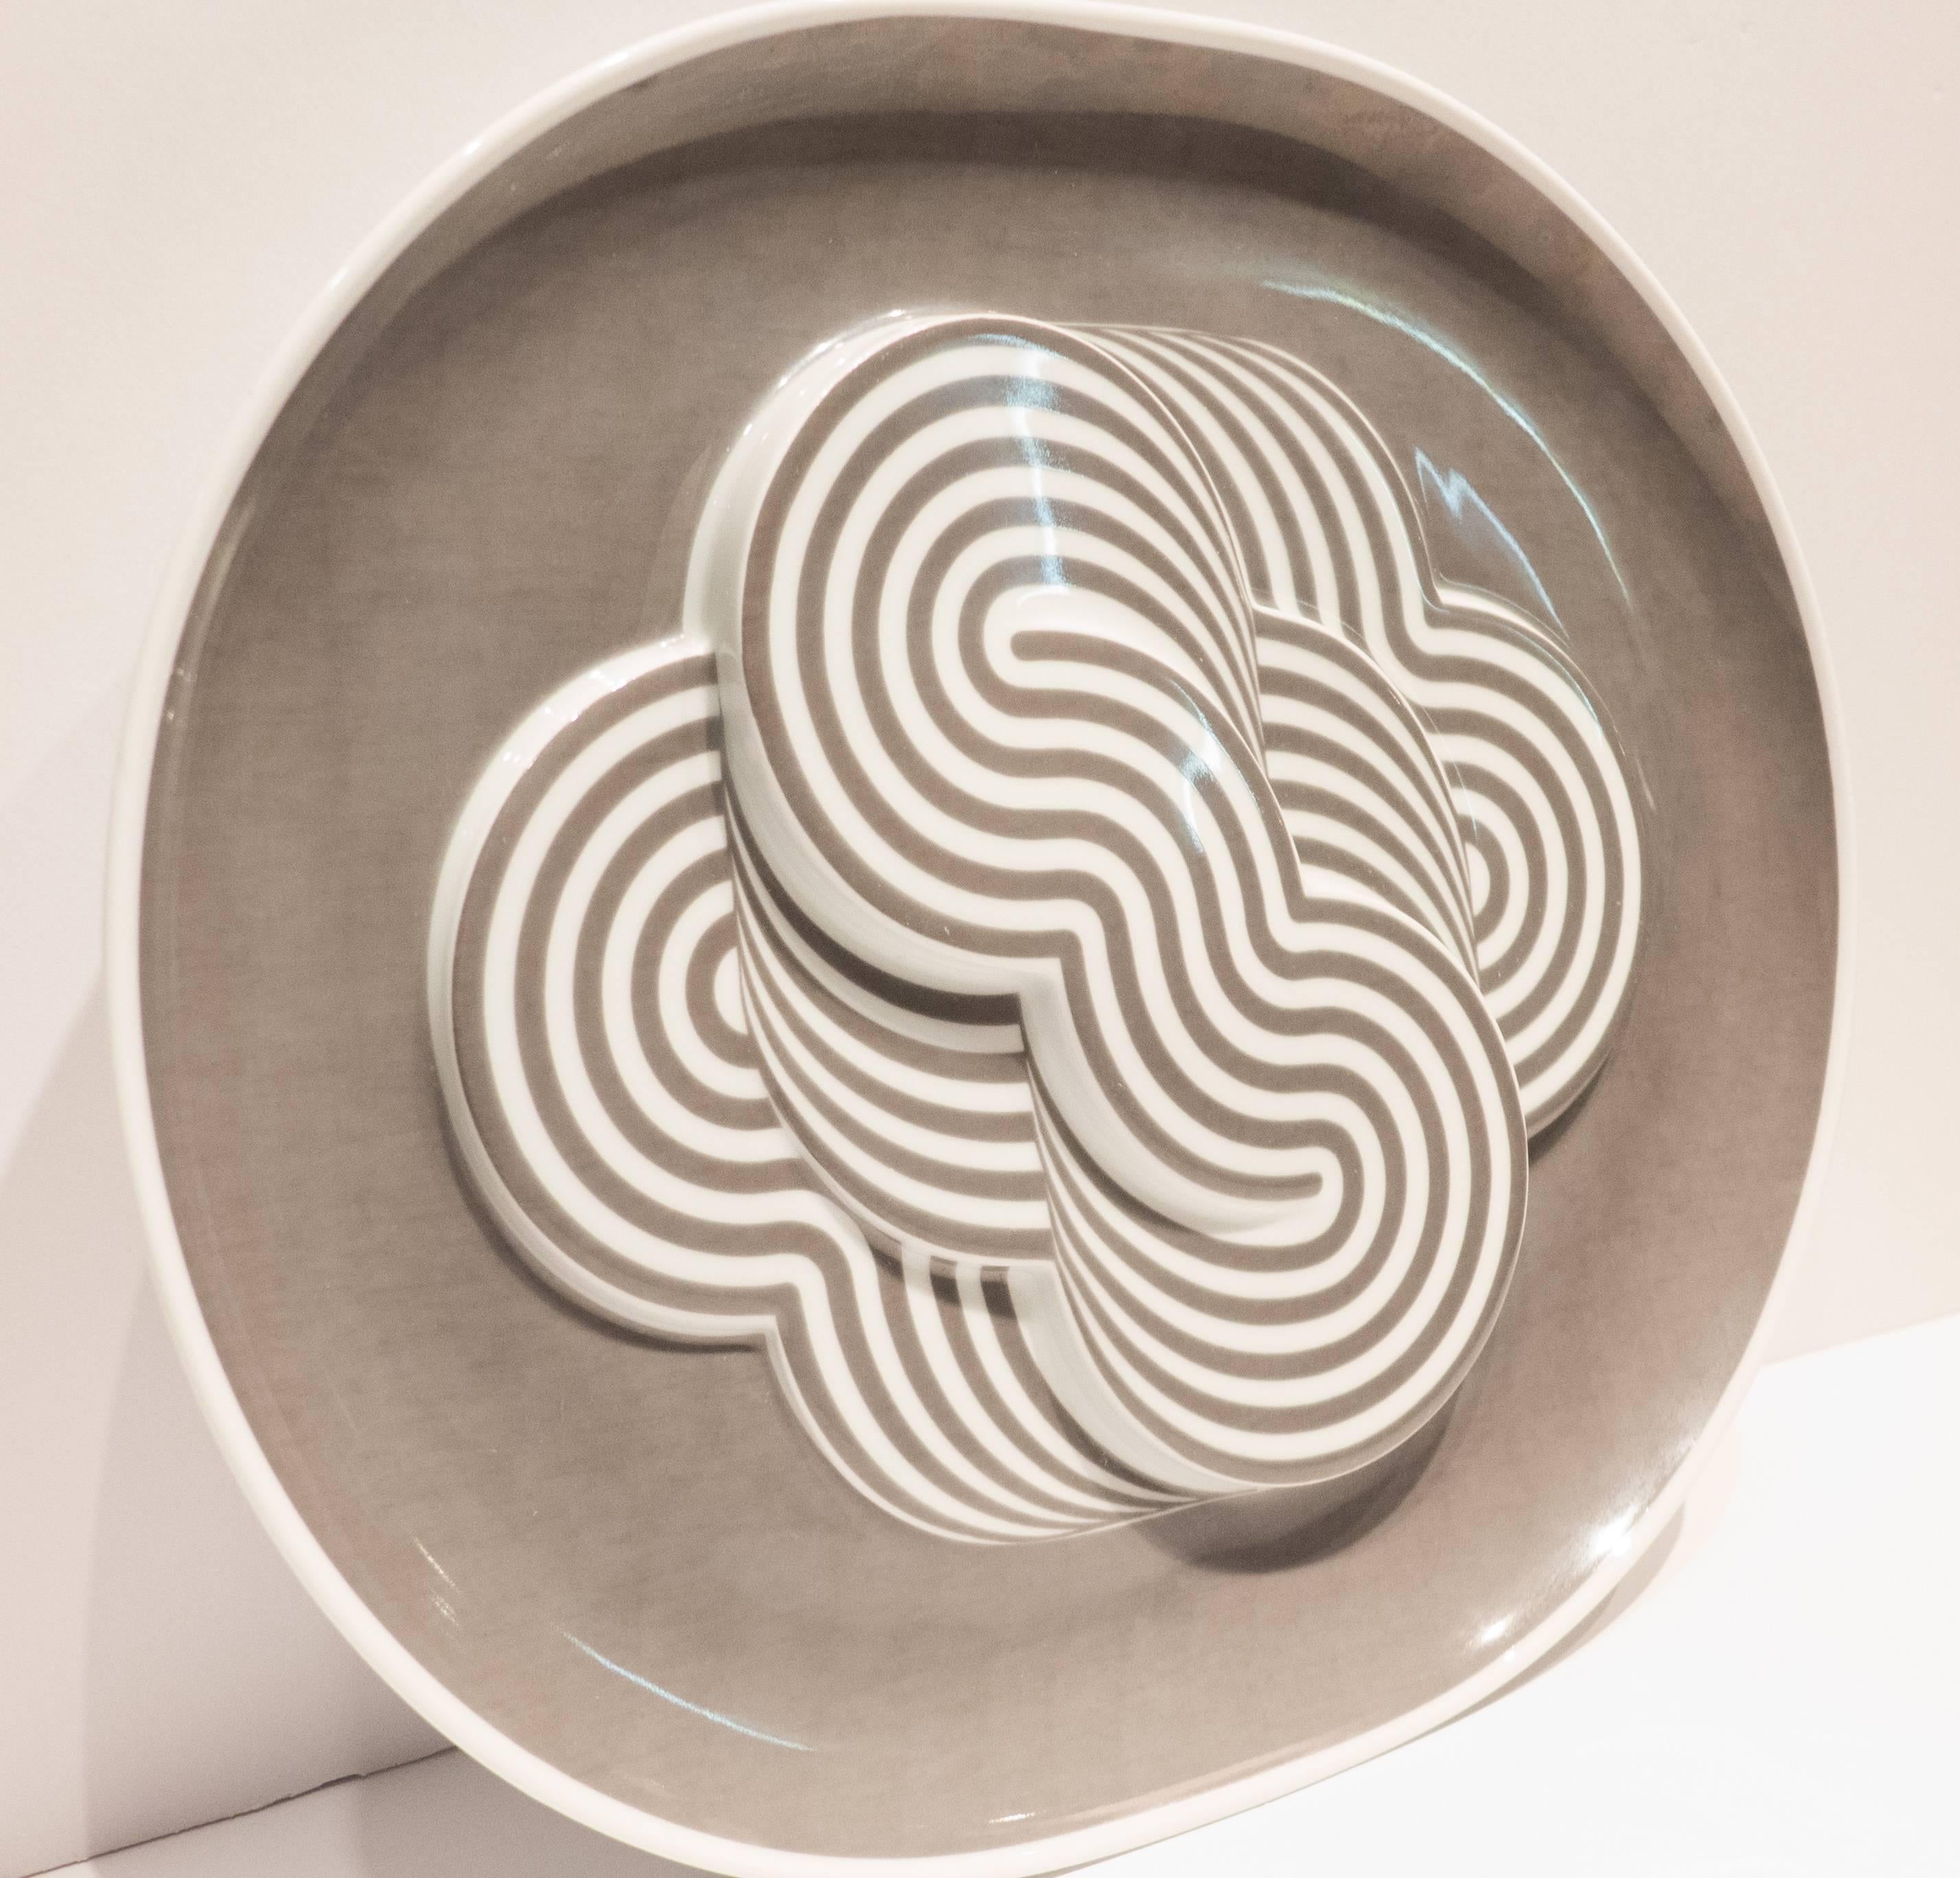 Porcelain relief plaque by Italian artist Natale Sapone. Produced by Rosenthal Studio Line in 1972 in an edition of 3,000 of which this is number 1389. The Jahresteller series, begun in 1971, consisted of an annual collaboration between Rosenthal